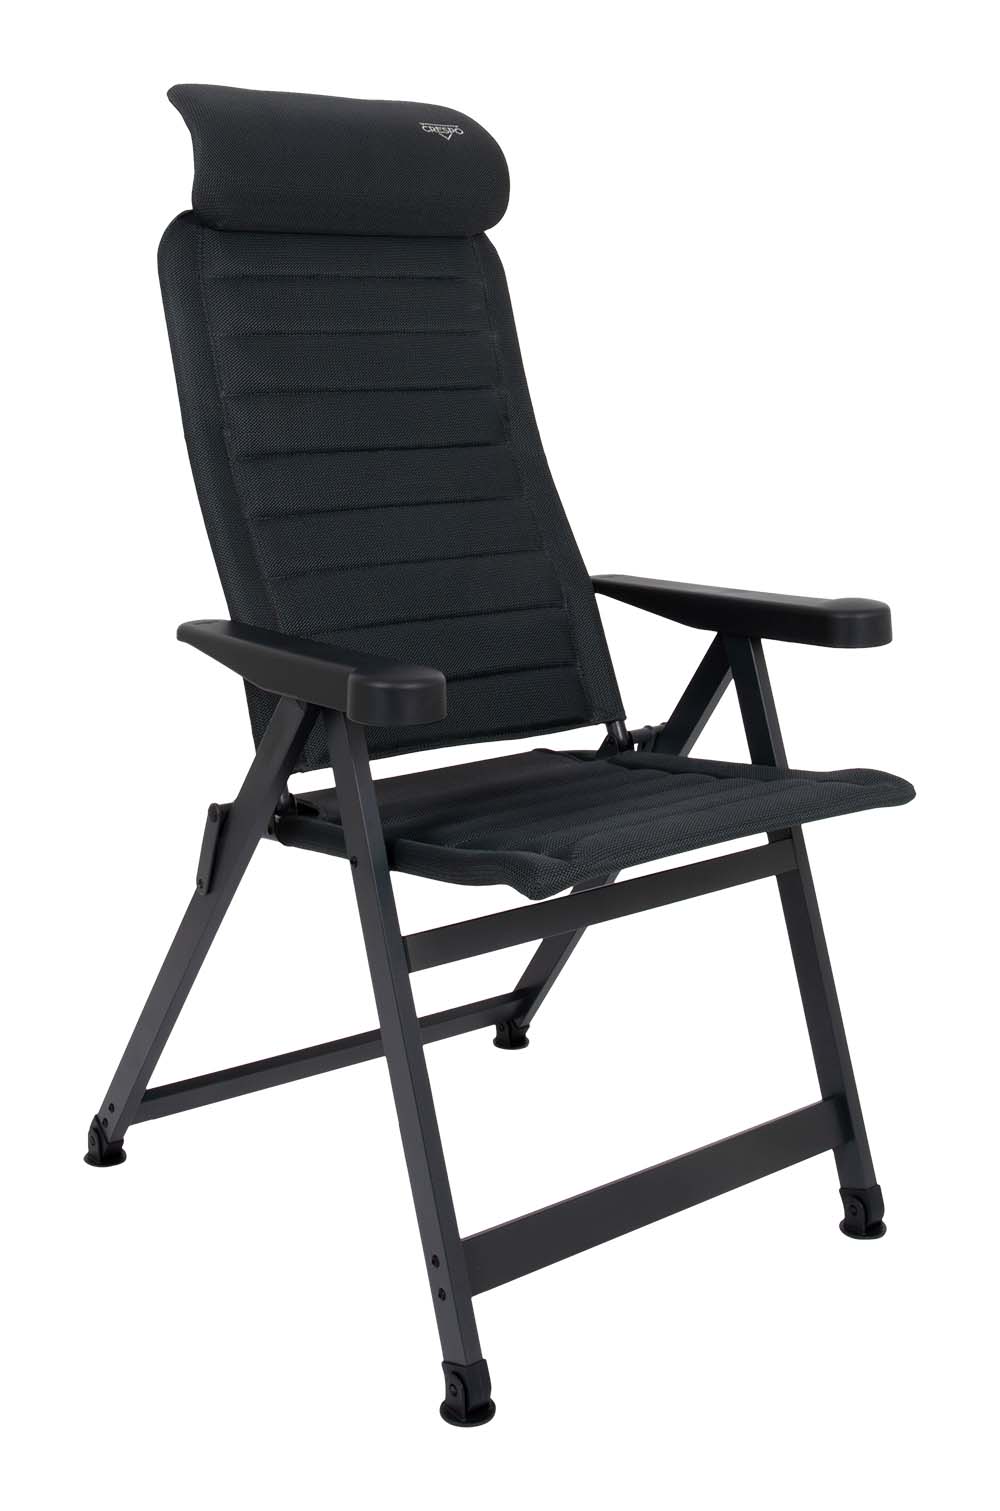 1149525 An ergonomic 7-position adjustable standing chair. The chair is designed in a square frame and equipped with stabilization feet so that the chair is always sturdy. In addition, the chair is equipped with an adjustable headrest. The comfortable and chic upholstery is extra breathable and does not retain moisture due to its open cell structure. This makes the chair dry much faster than chairs with traditional foam padding. This chair has an extra high seat and a longer backrest. Ideal for the taller person. Provides maximum comfort with the 7-position adjustable backrest. Both the backrest and armrests are ergonomically shaped. The chair features an anodized H-frame for added stability and strength.